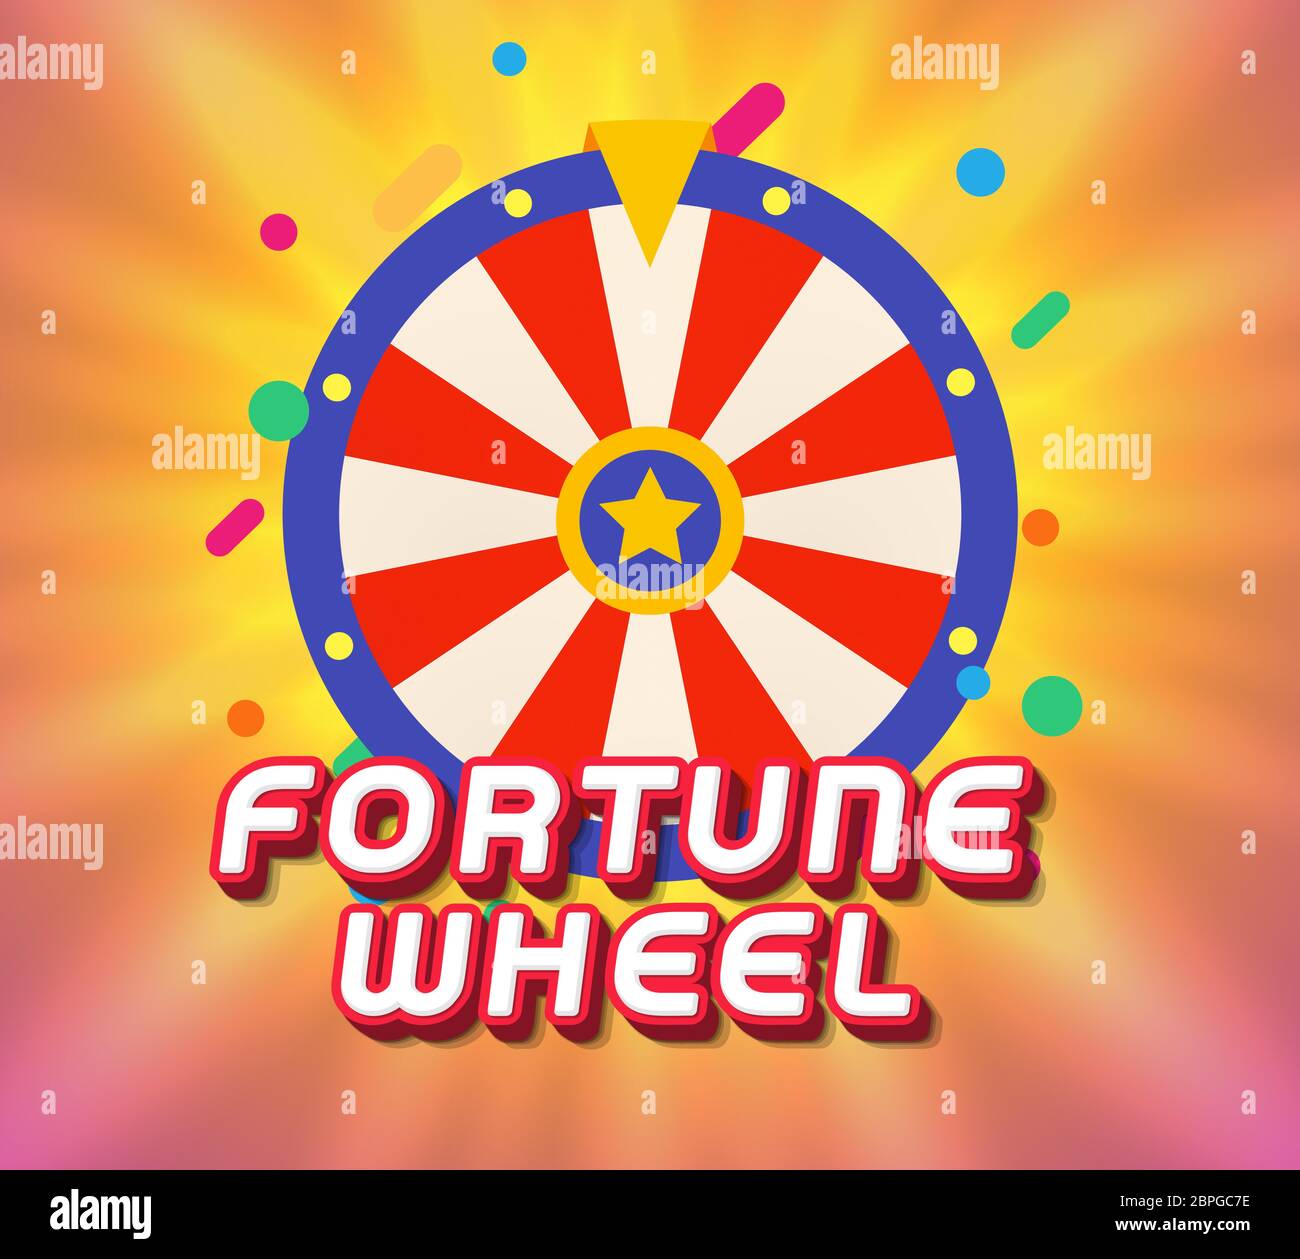 Isolated funny kids fortune wheel vector illustration. Children game, online competition iicon. Casino gambling, staking, betting element. Stock Vector